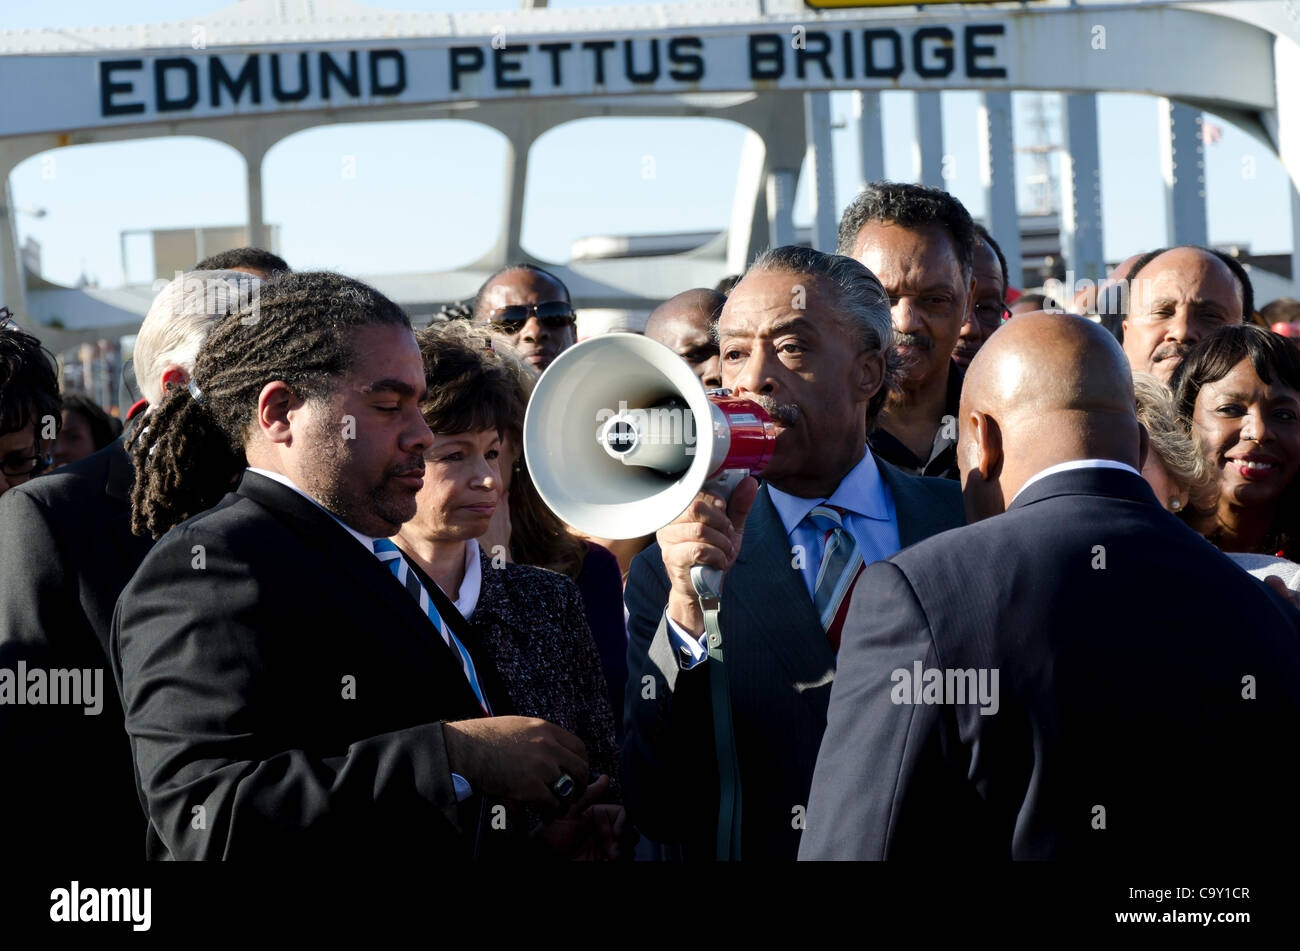 Reverend Al Sharpton speaks to crowd on the Edmund Pettus Bridge before starting the Selma to Montgomery march on March 4, 2012.  This march was to commemorate the 1965 voting rights march in Alabama, United States. Stock Photo